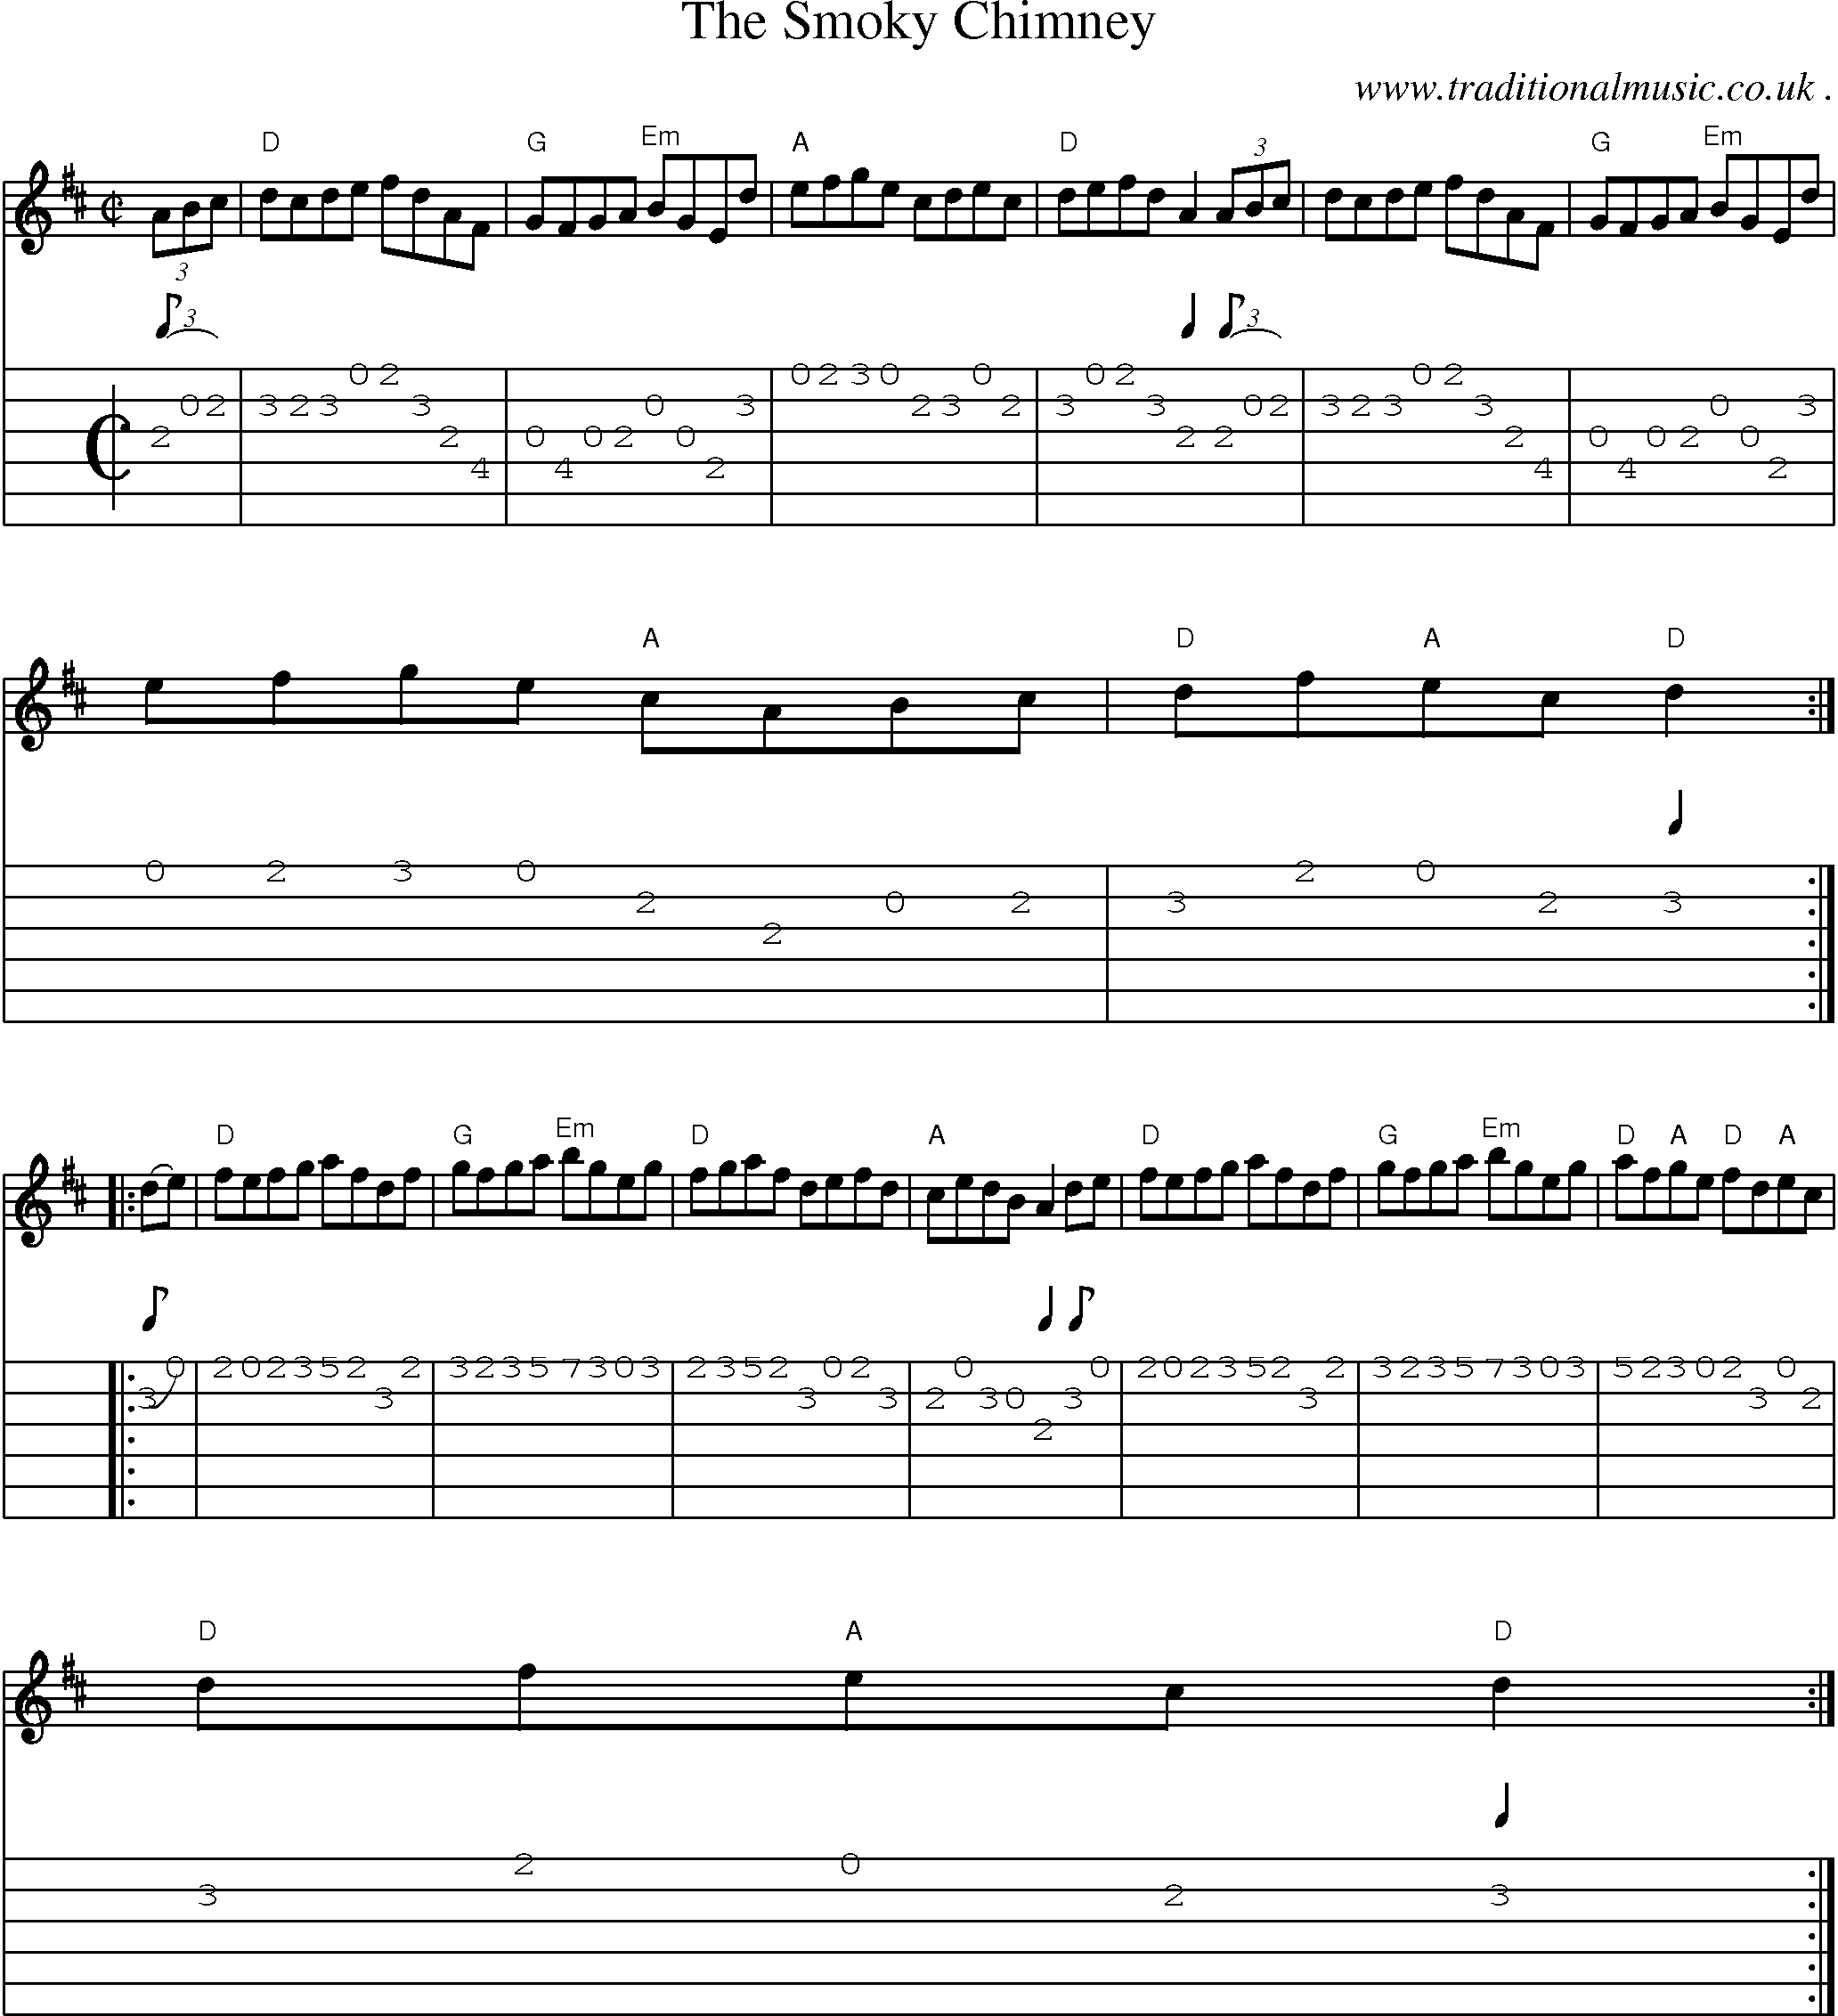 Music Score and Guitar Tabs for The Smoky Chimney